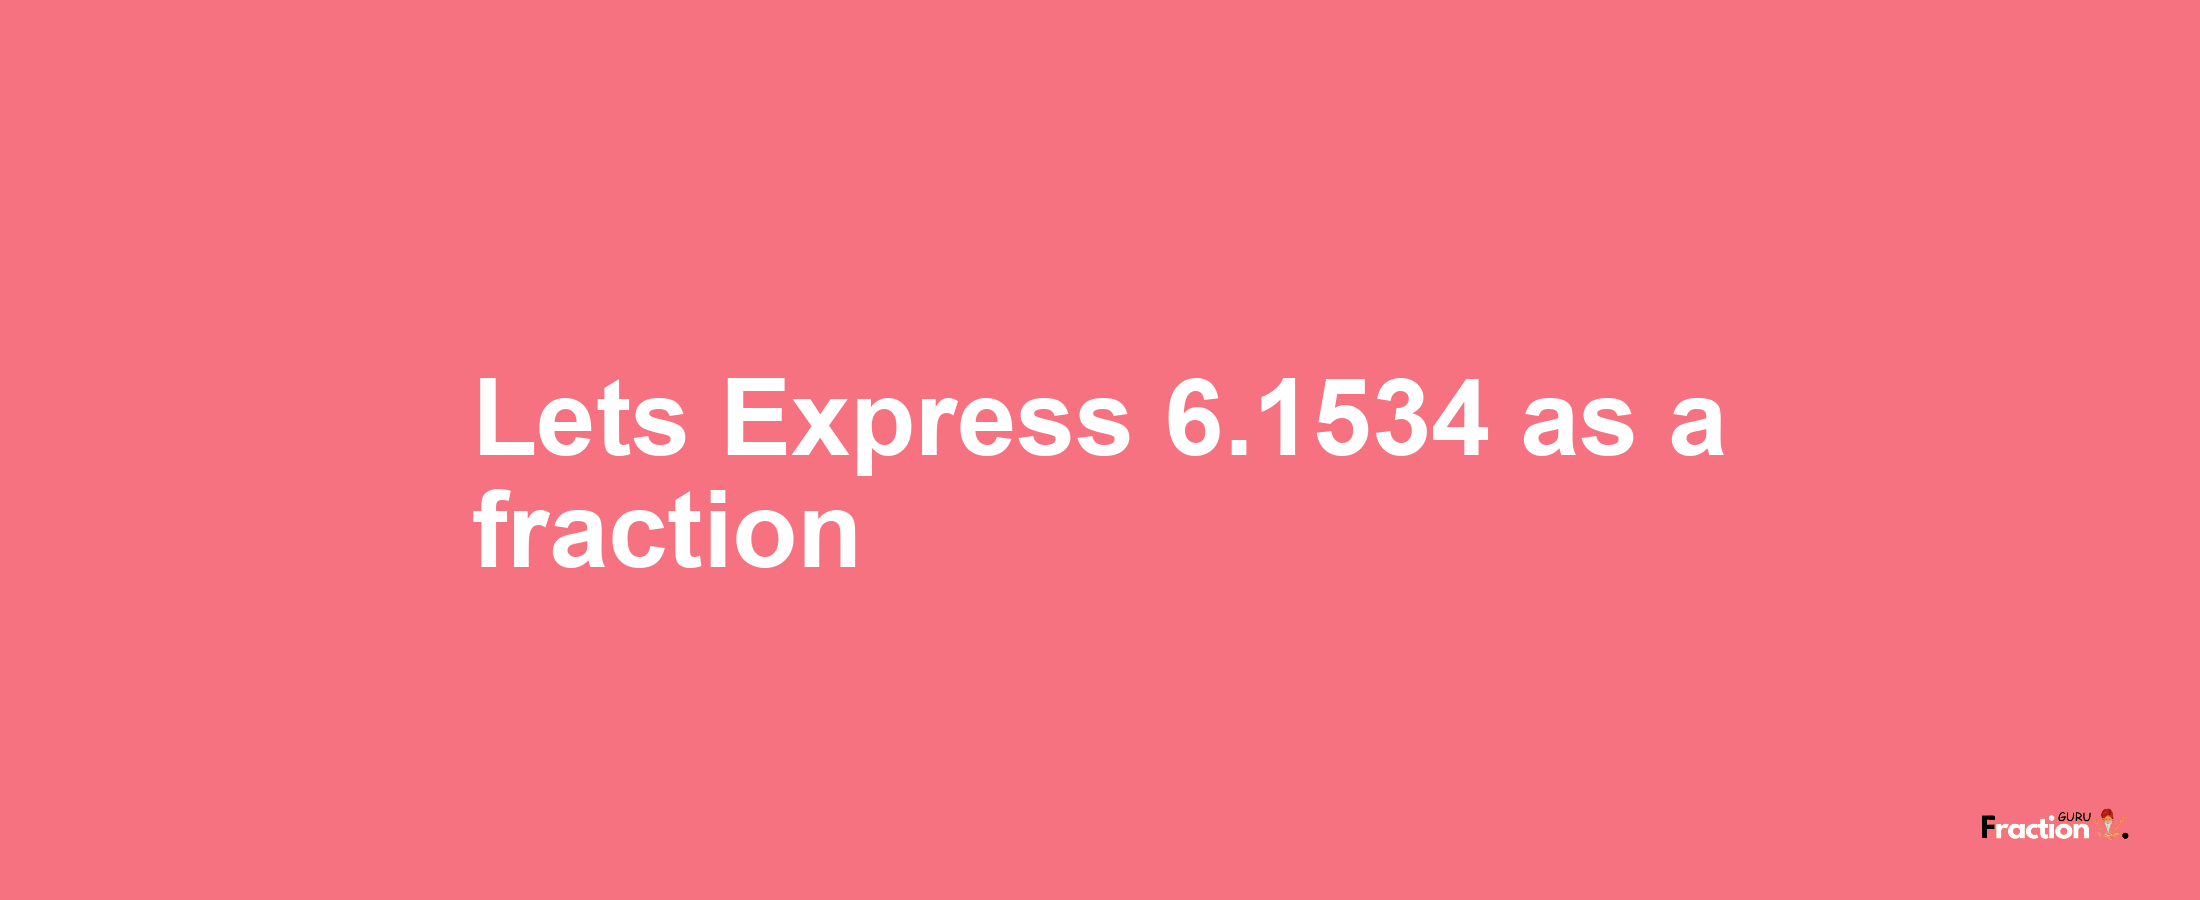 Lets Express 6.1534 as afraction